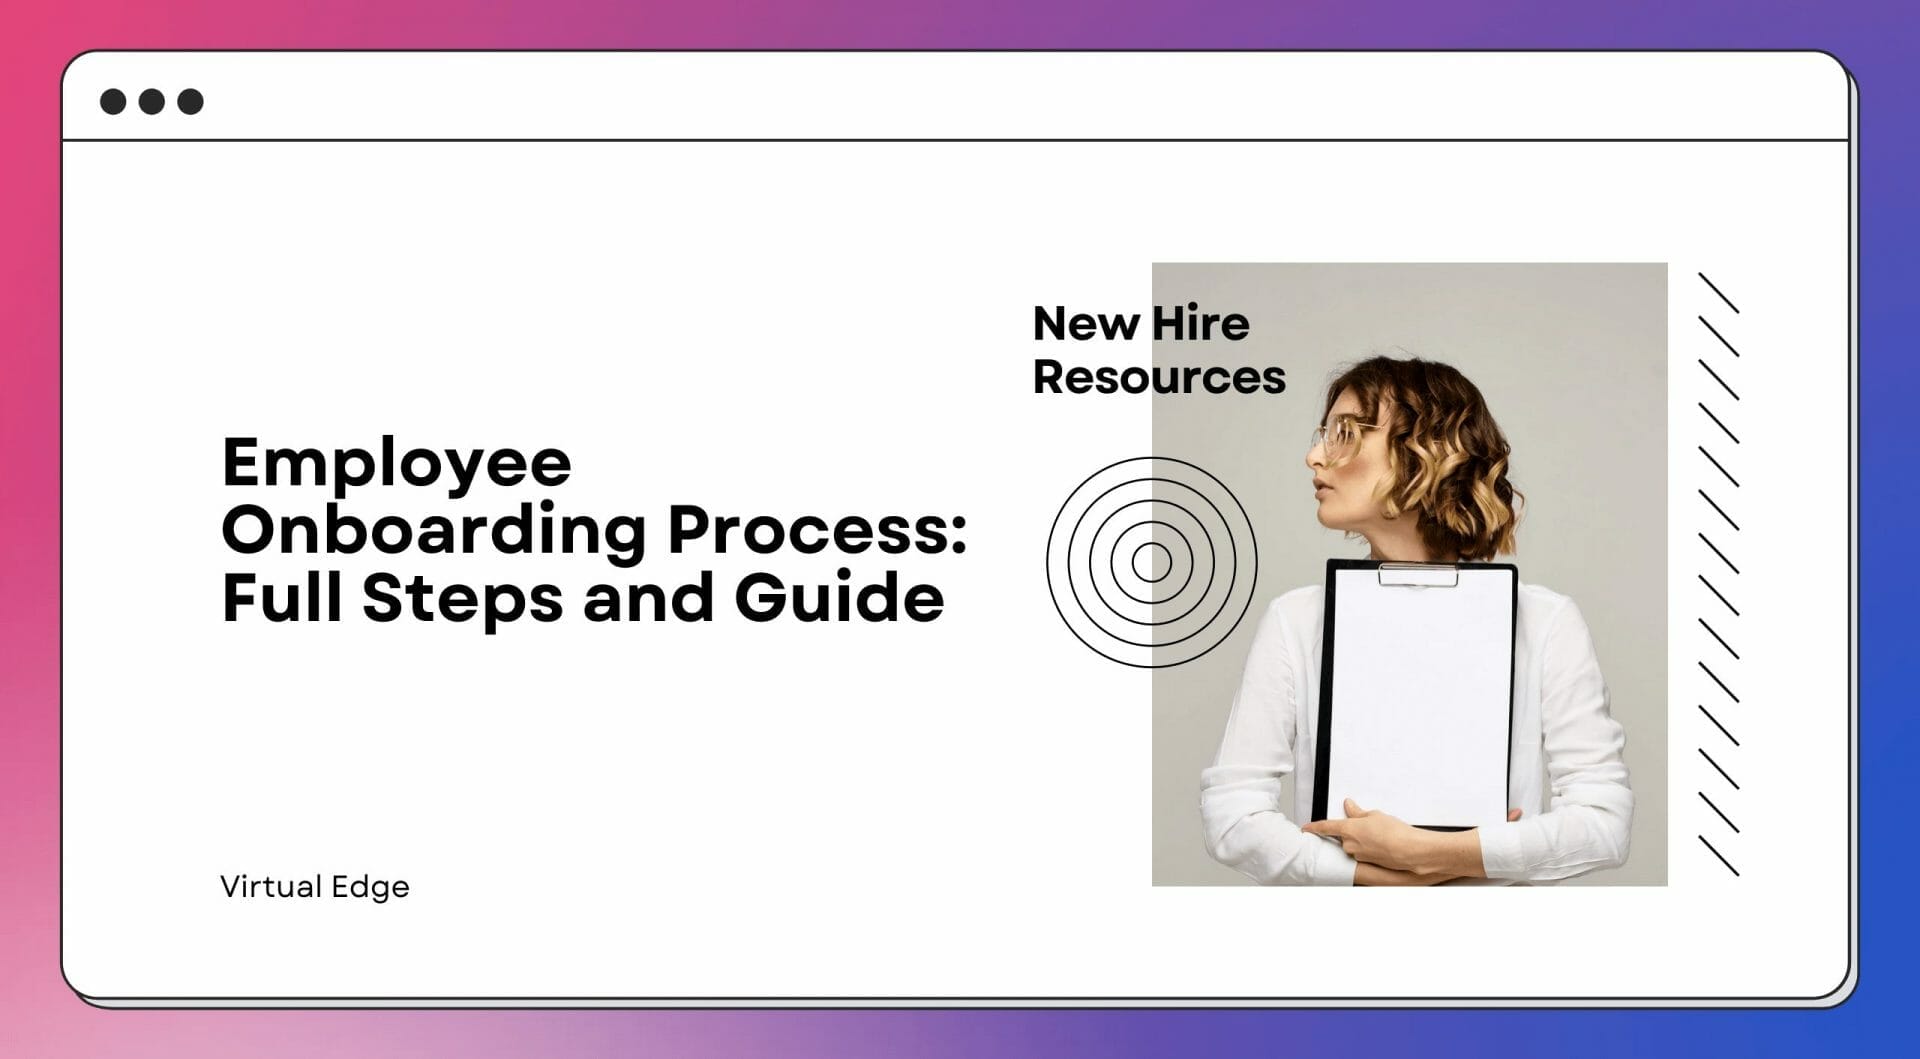 Employee Onboarding Process - Full Steps and Guide